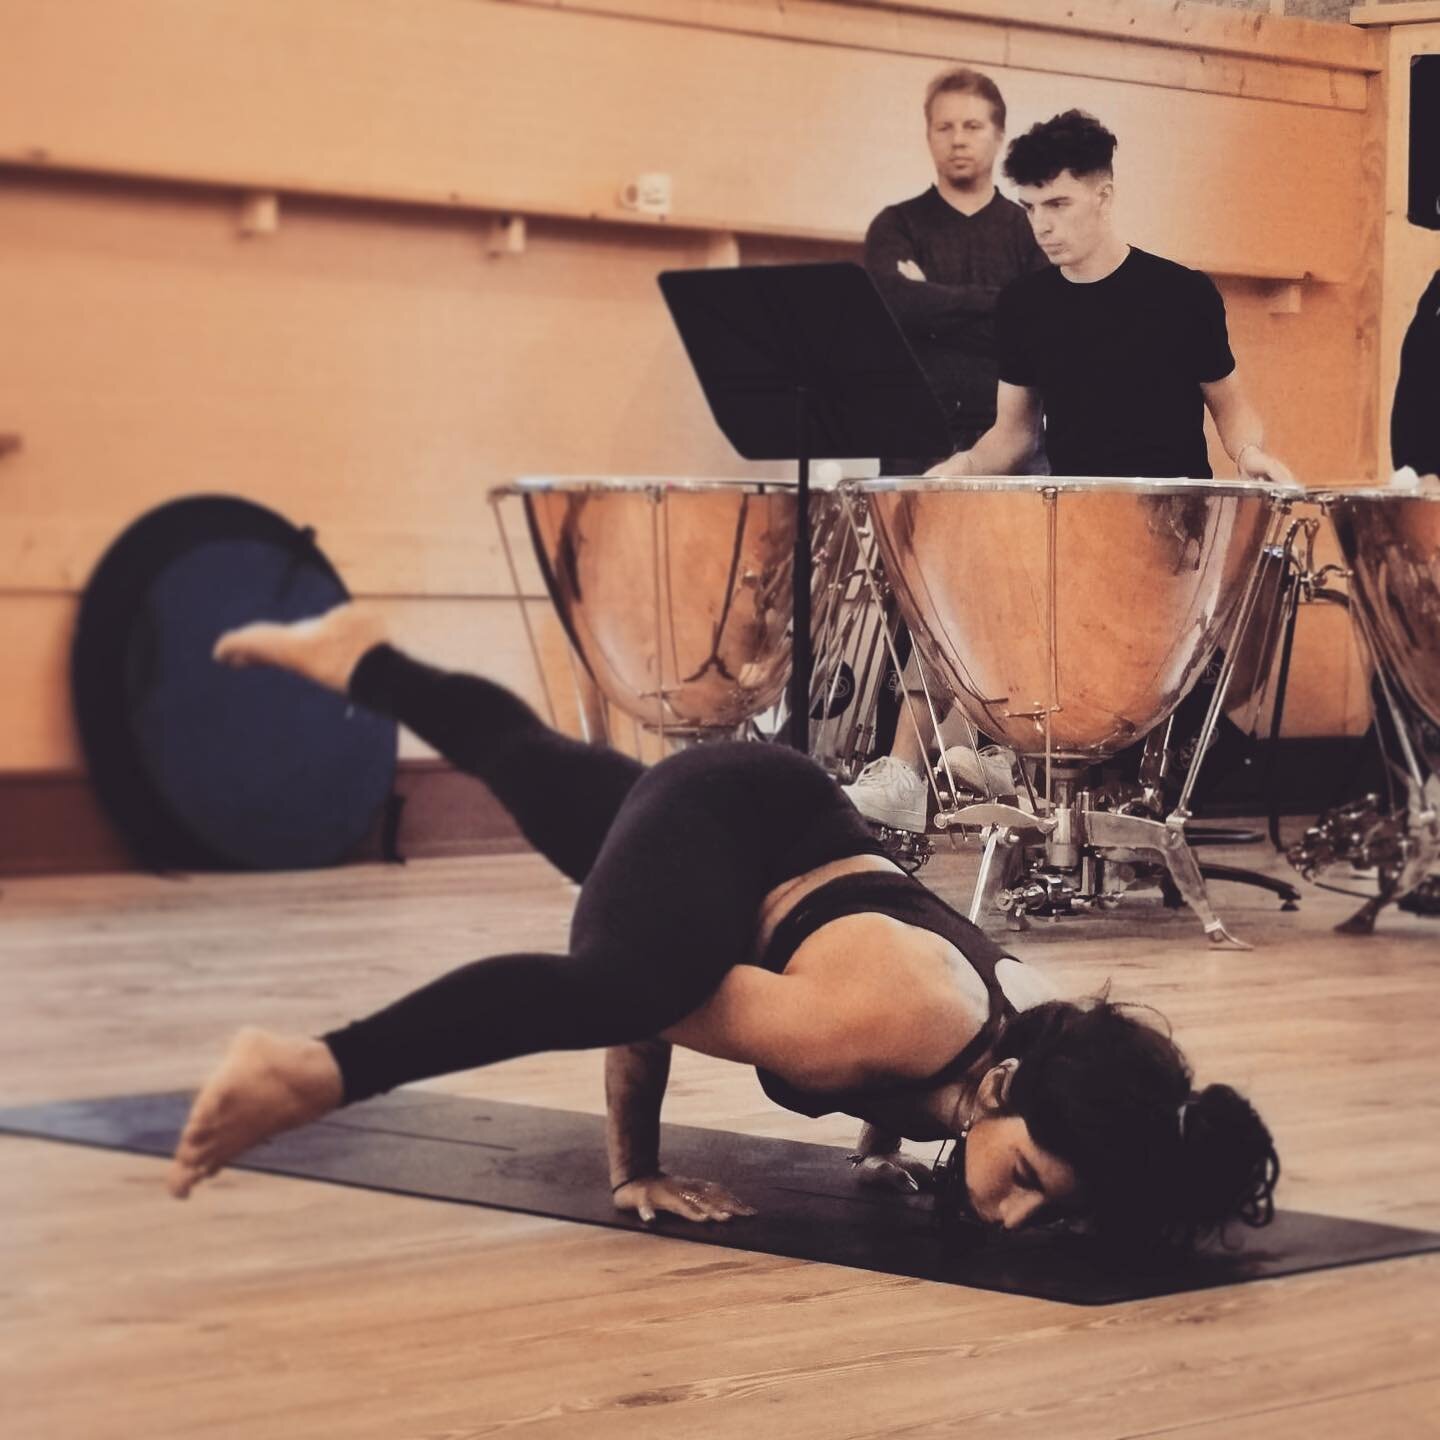 Today I did something I&rsquo;ve feared since I was 12,
I stood in front of an audience preforming a intuitive yoga-dance flow to the music that was composed and played by amazing symphony orchestra musicians.

I feel so honored to have been asked to